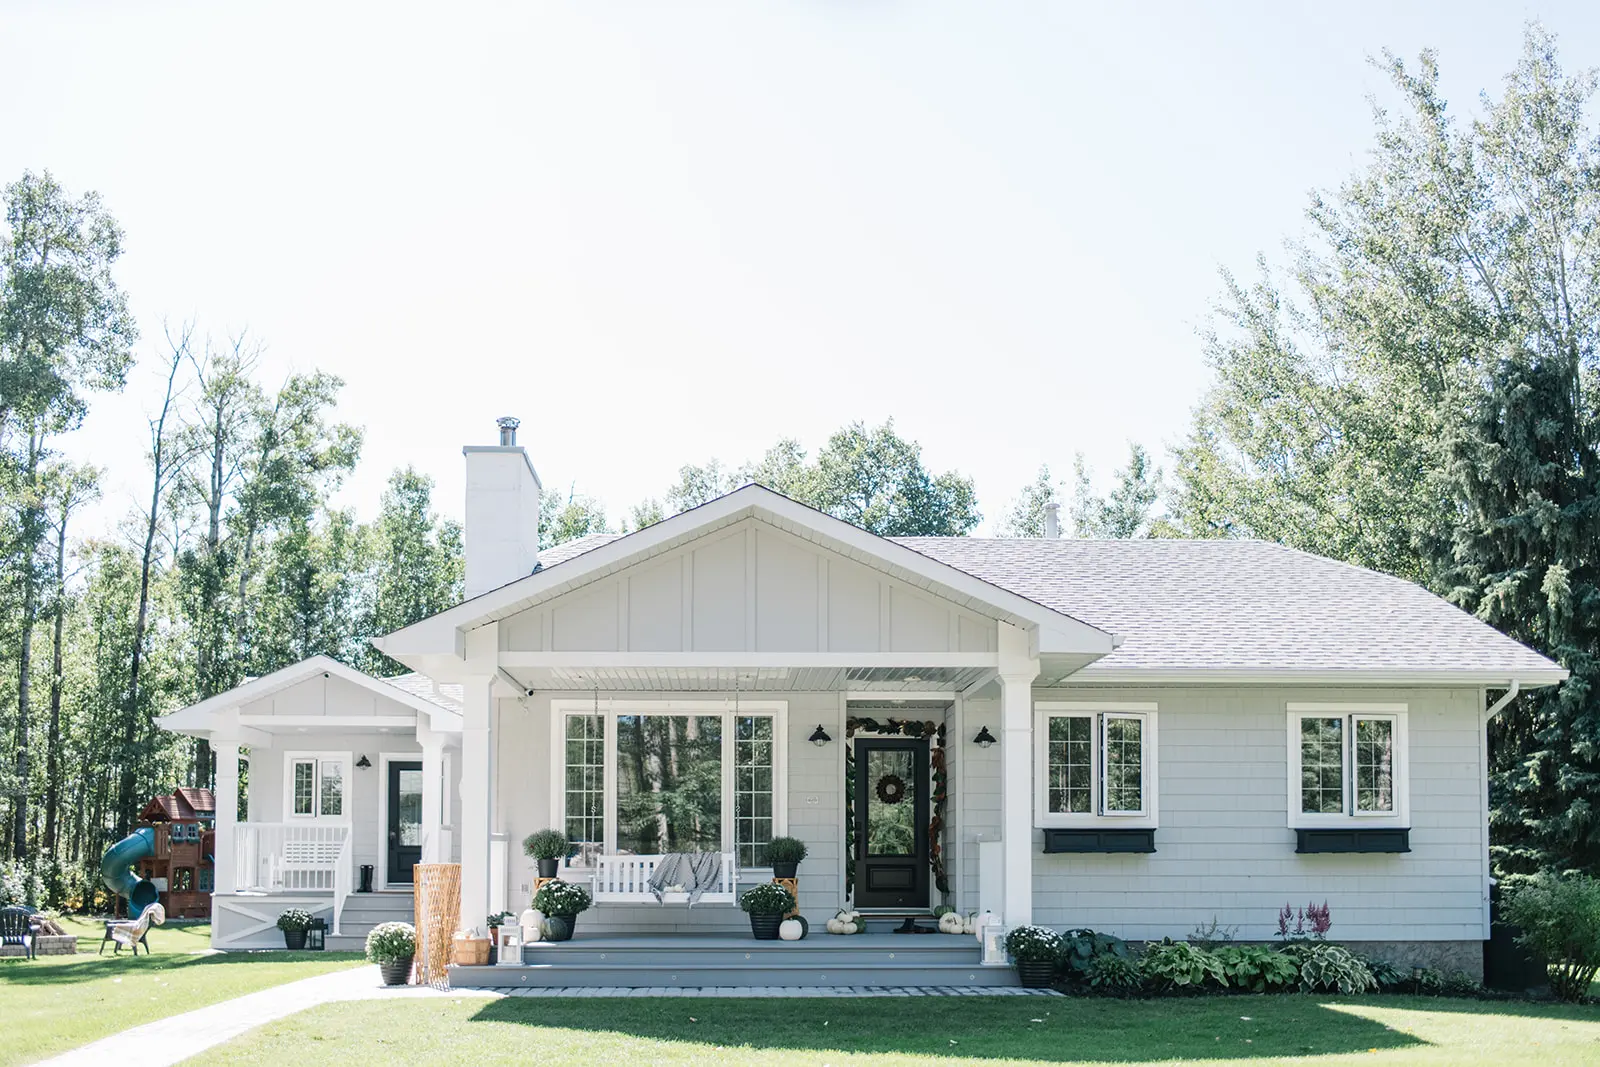 A modern farmhouse style exterior renovation created this single level home with grey siding, a black door and white windows